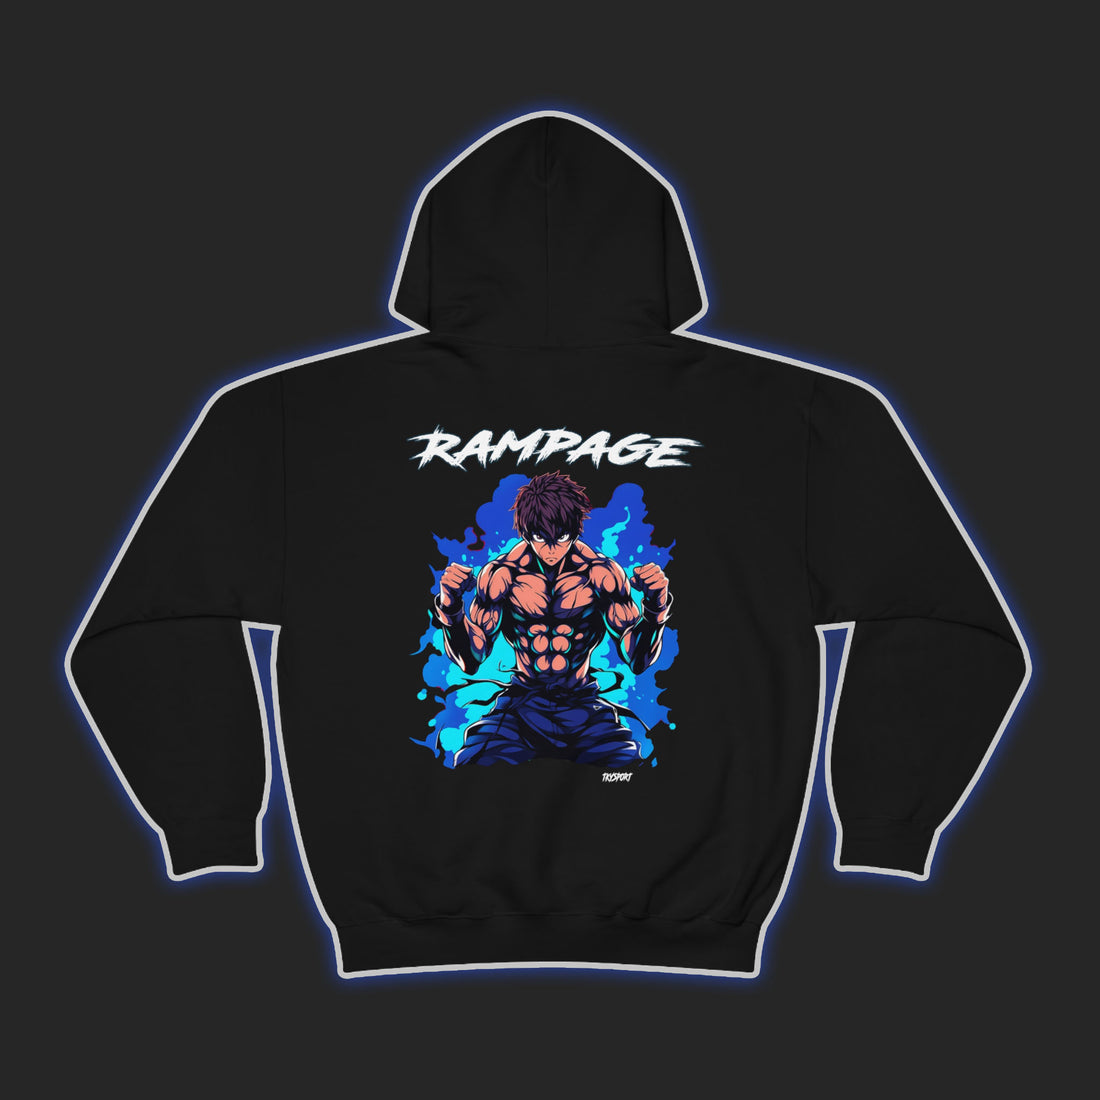 TKYSPORT Anime Hoodie Design of Baki posing with a fighting stance. The word &quot;Rampage&quot; is written across the top.